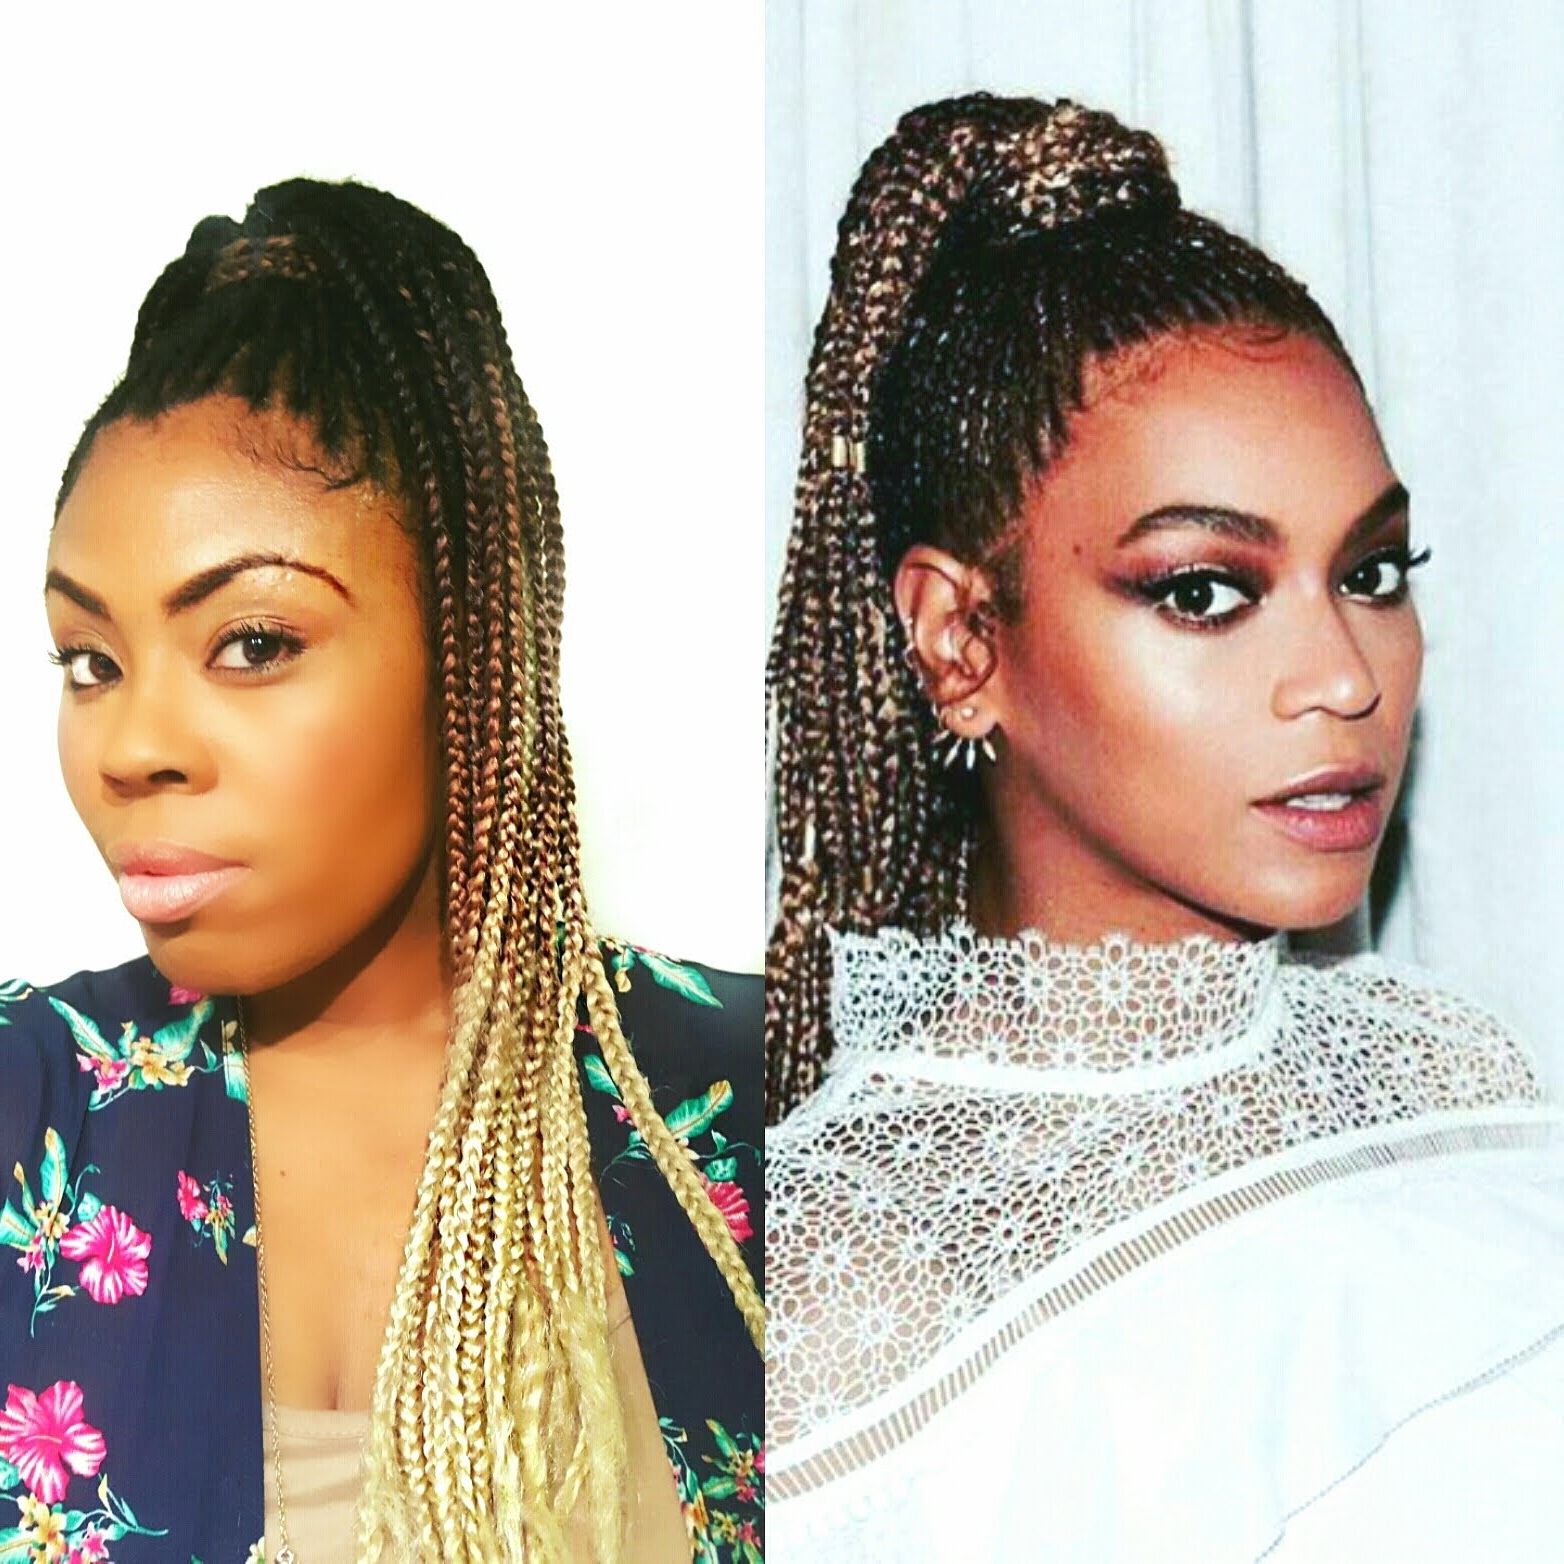 Beyonce Inspired Braided High Ponytail On Natural Hair – Youtube Within 2017 Beyonce Braided Hairstyles (View 8 of 15)